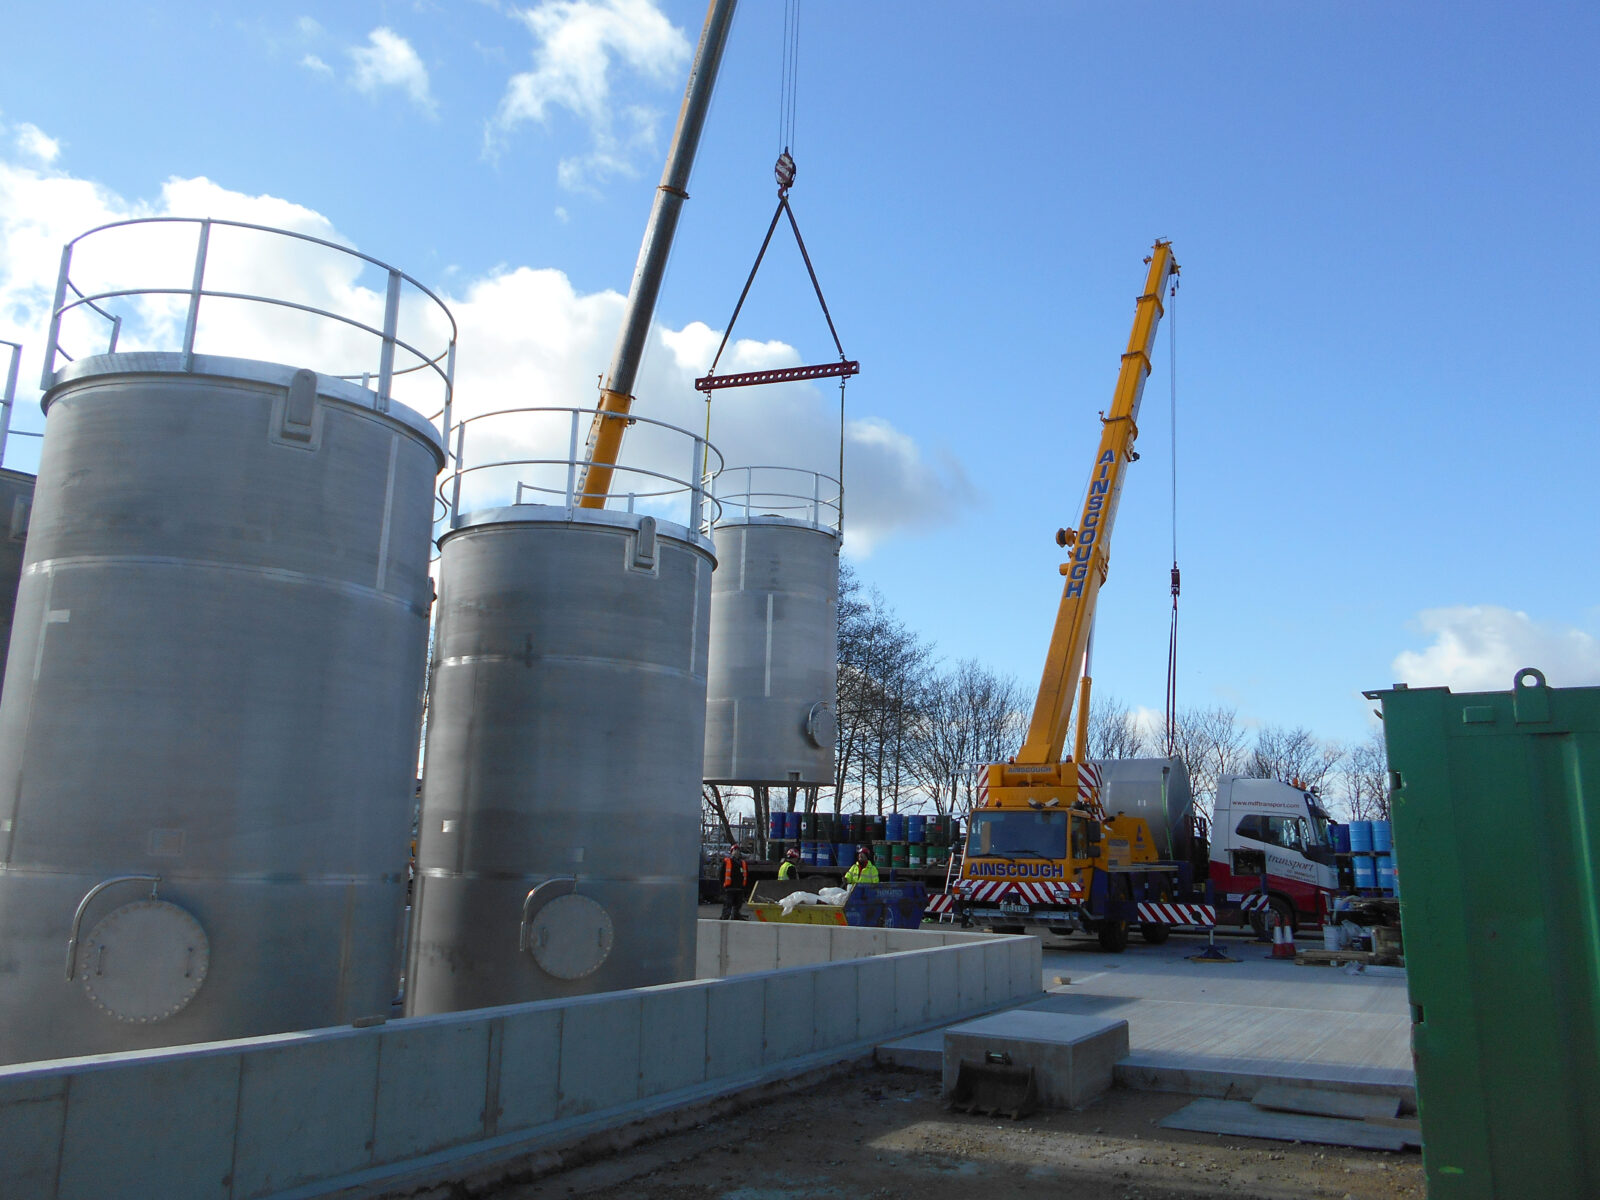 Penultimate storage vessel lowered into position